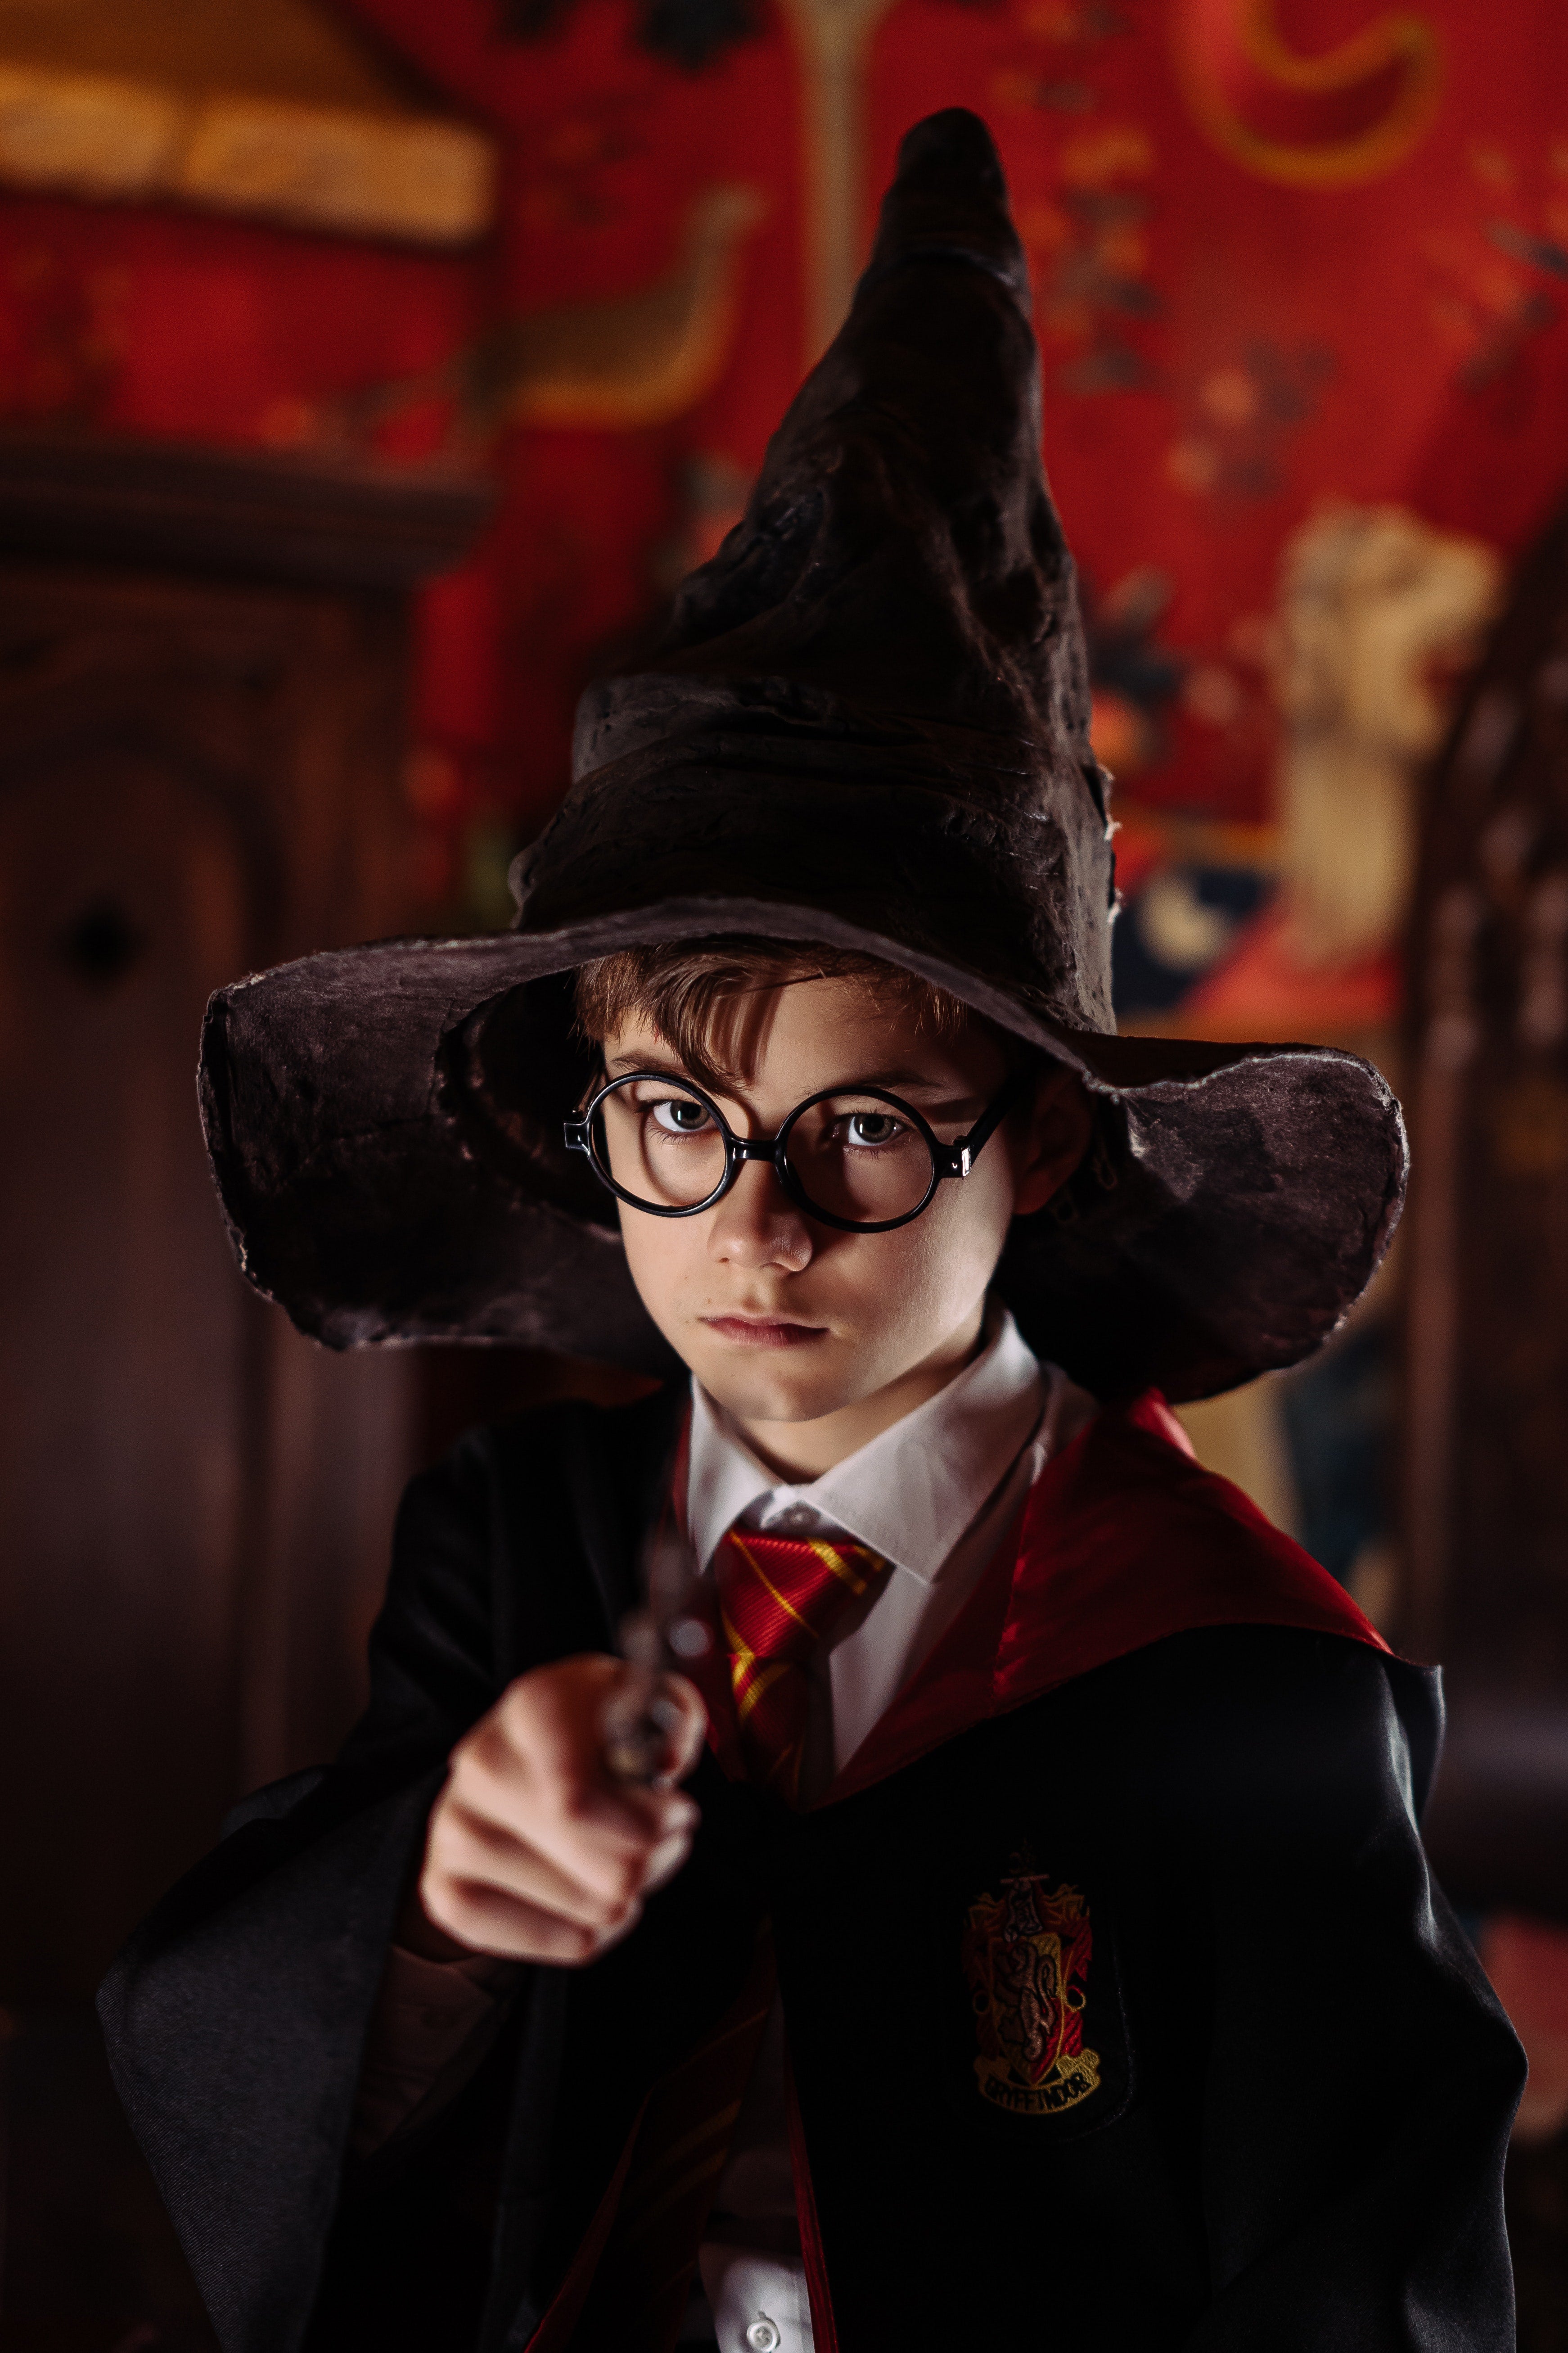 A boy in a Harry Potter costume and a tall black hat